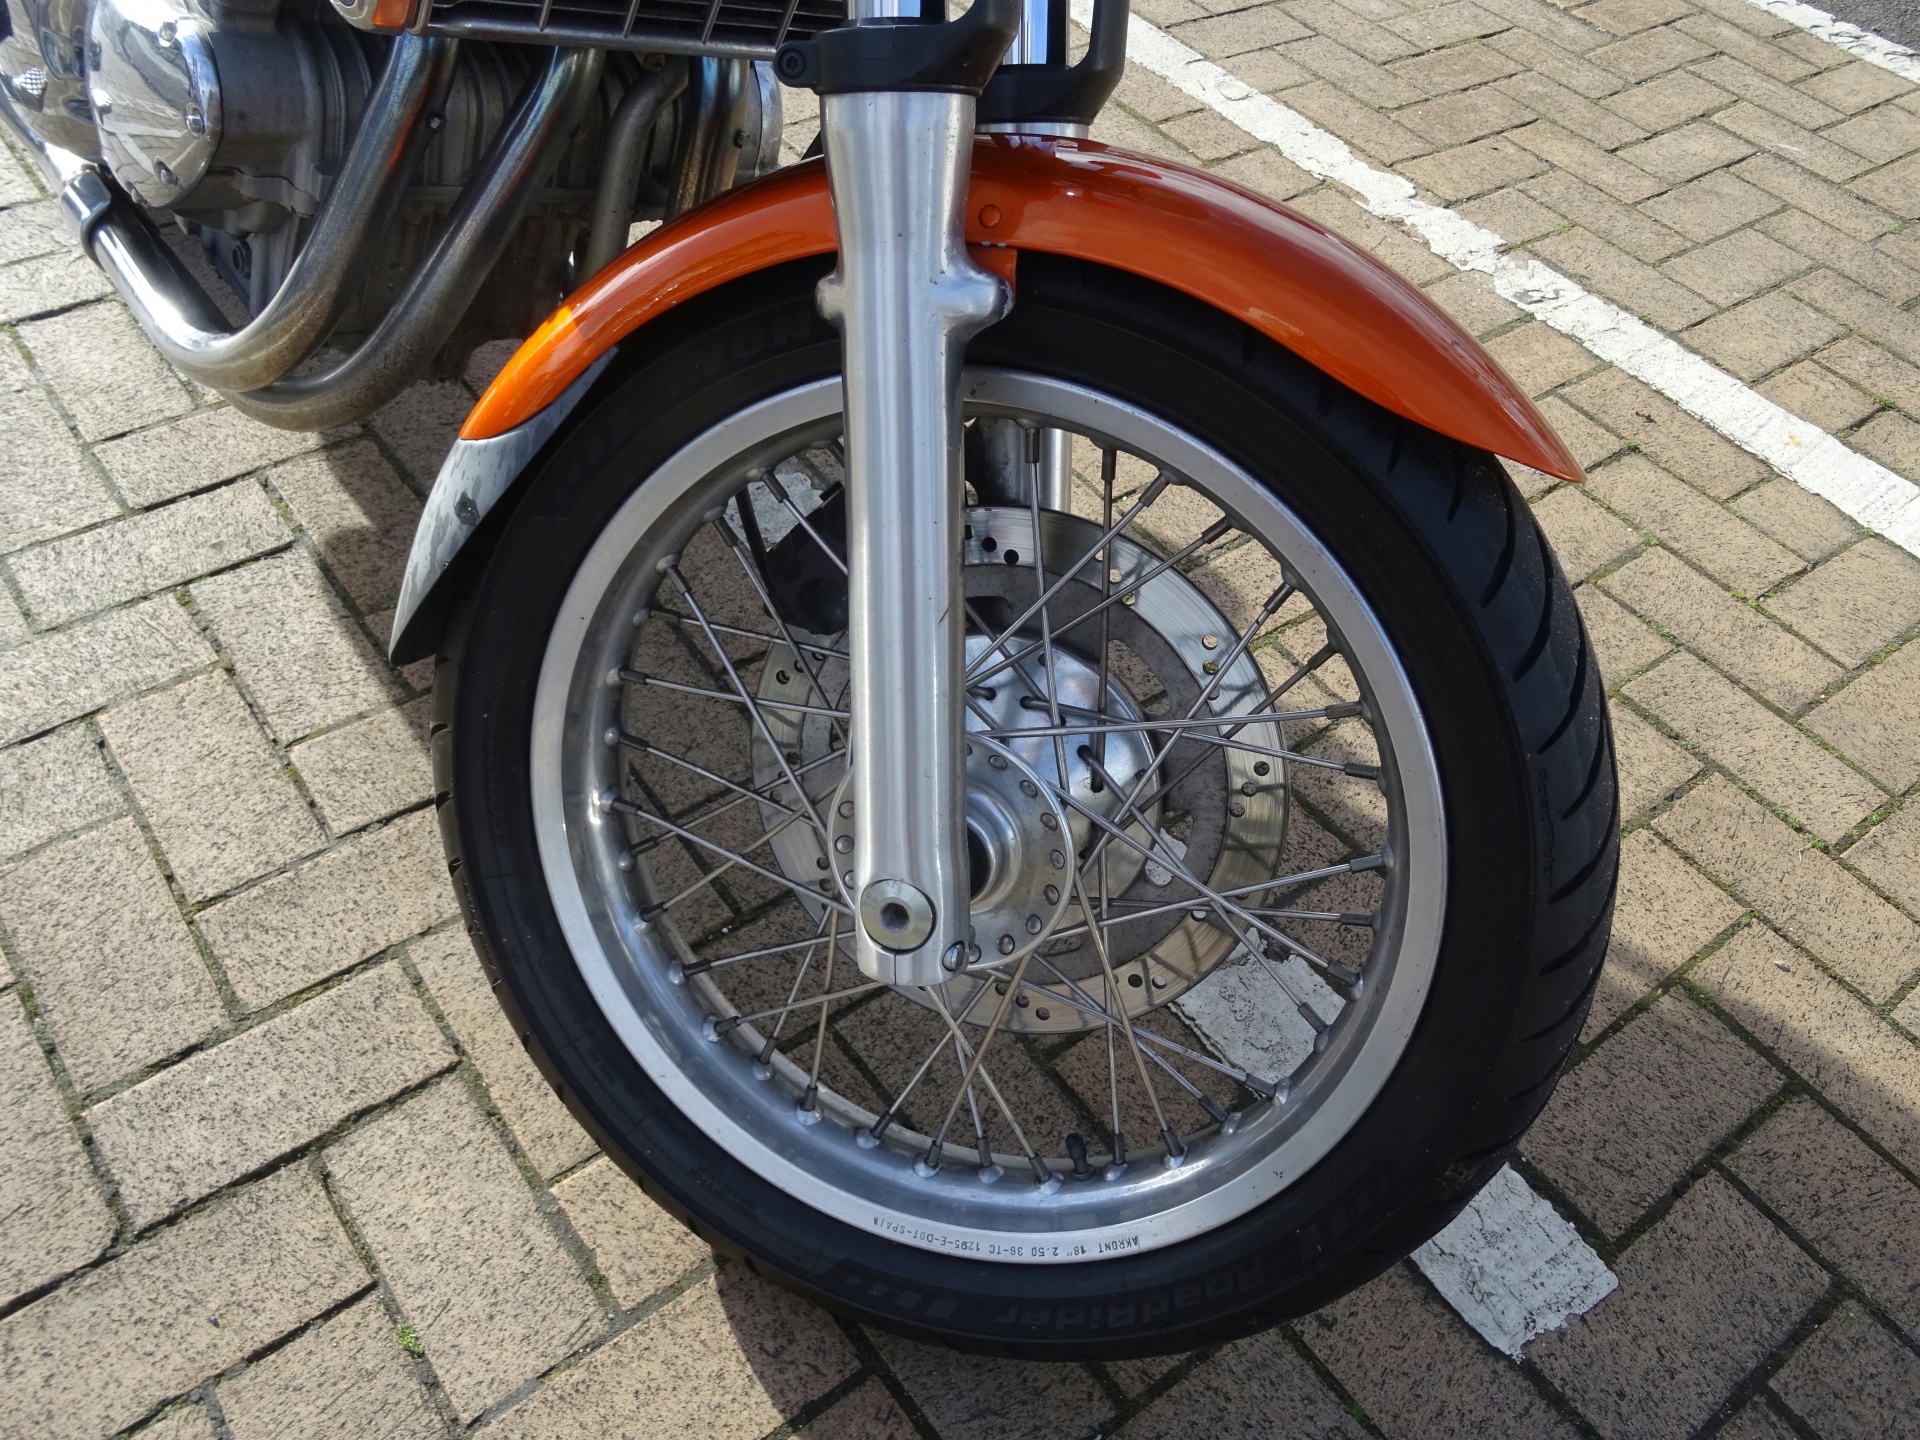 Triumph Motorcycle Front Wheel